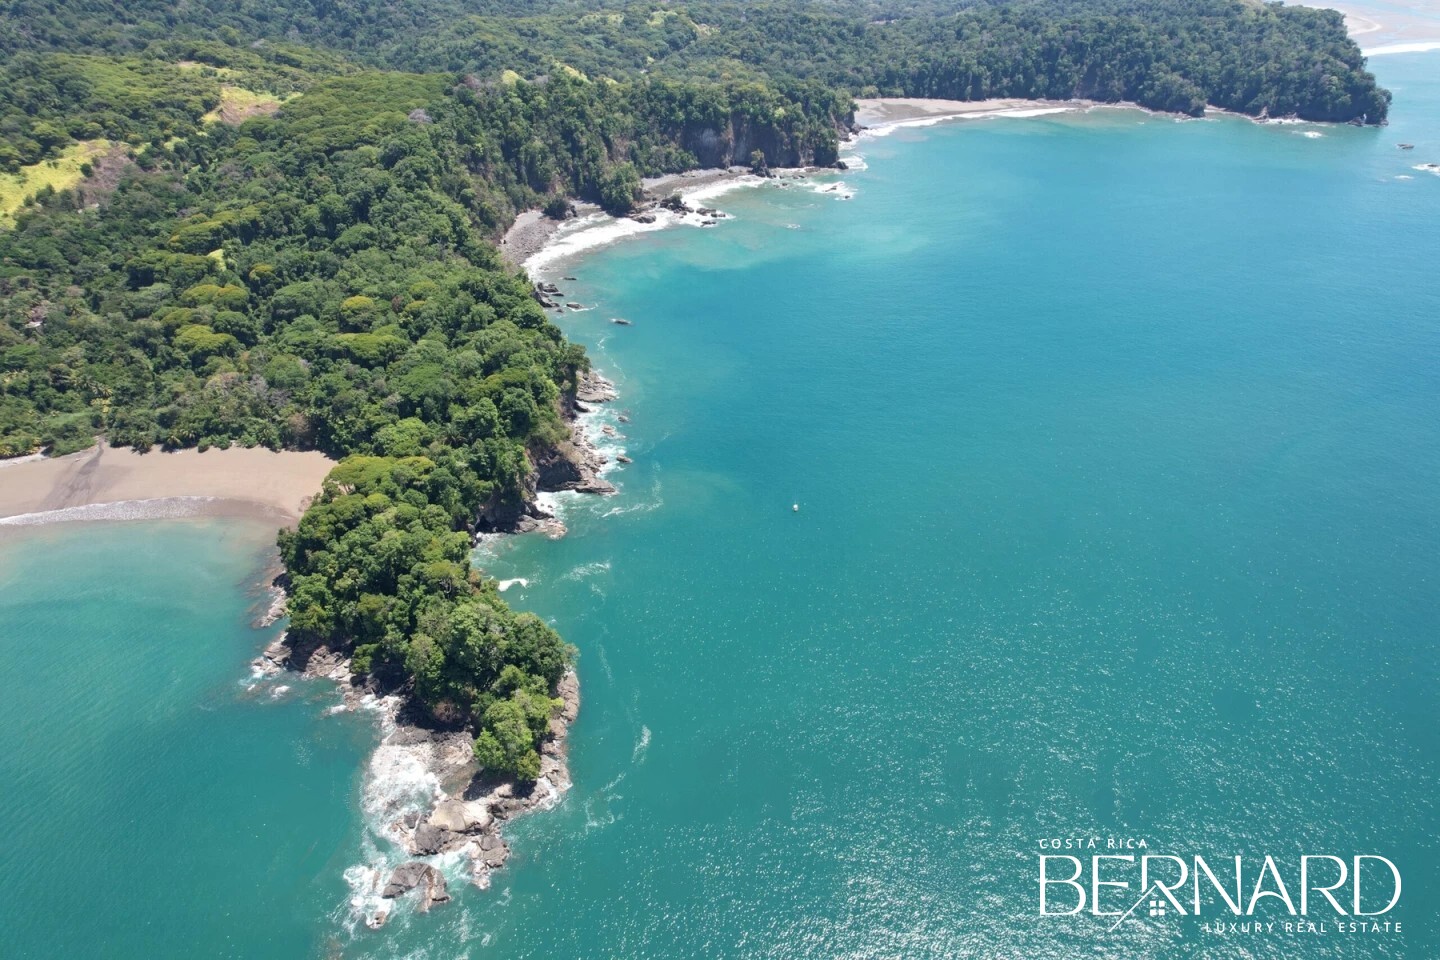 Scenic view of a lush Costa Rican landscape ideal for real estate investment